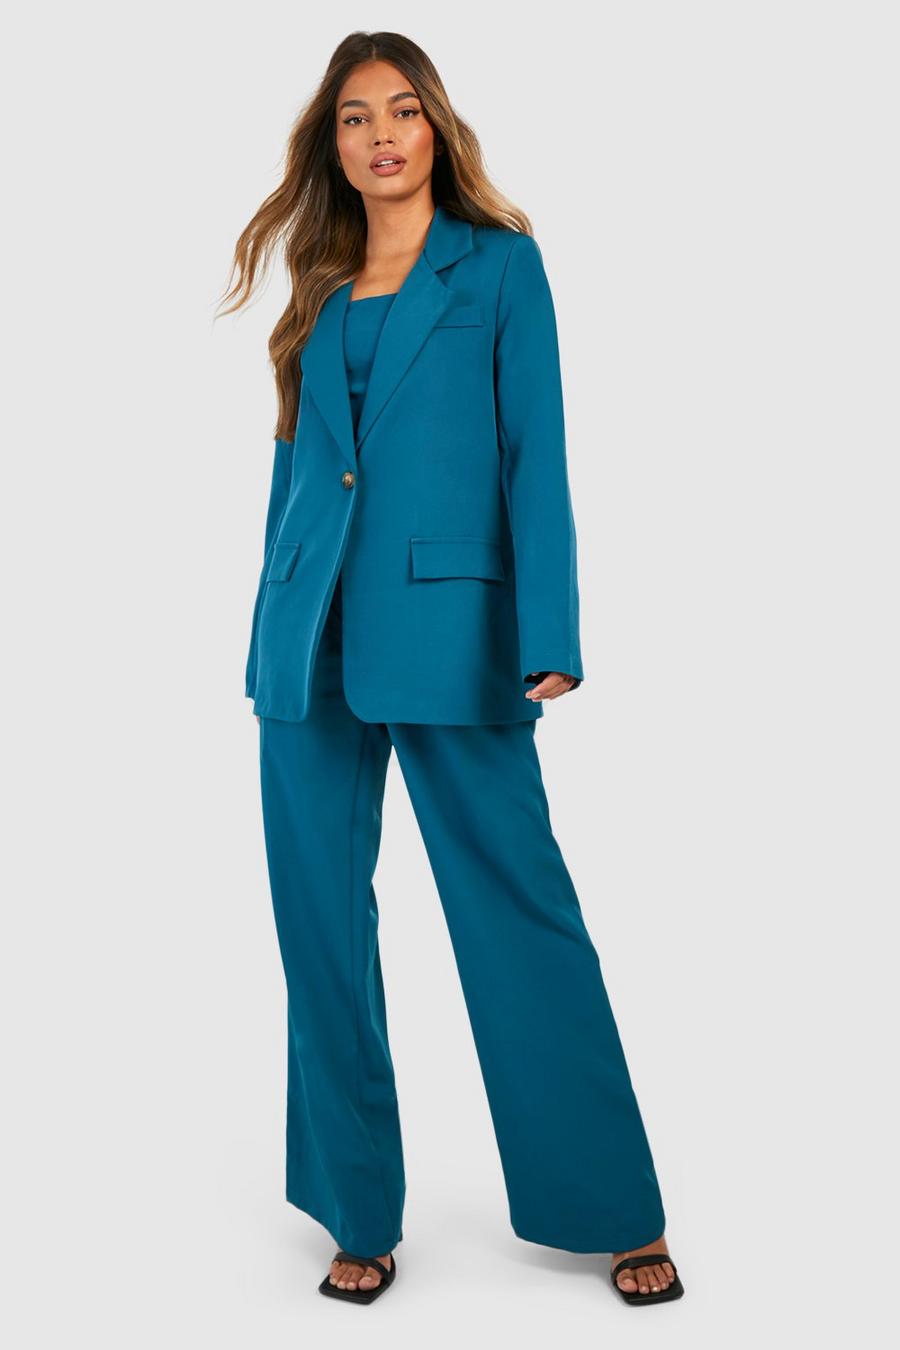 Teal Fold Over Waistband Relaxed Fit Dress Pants